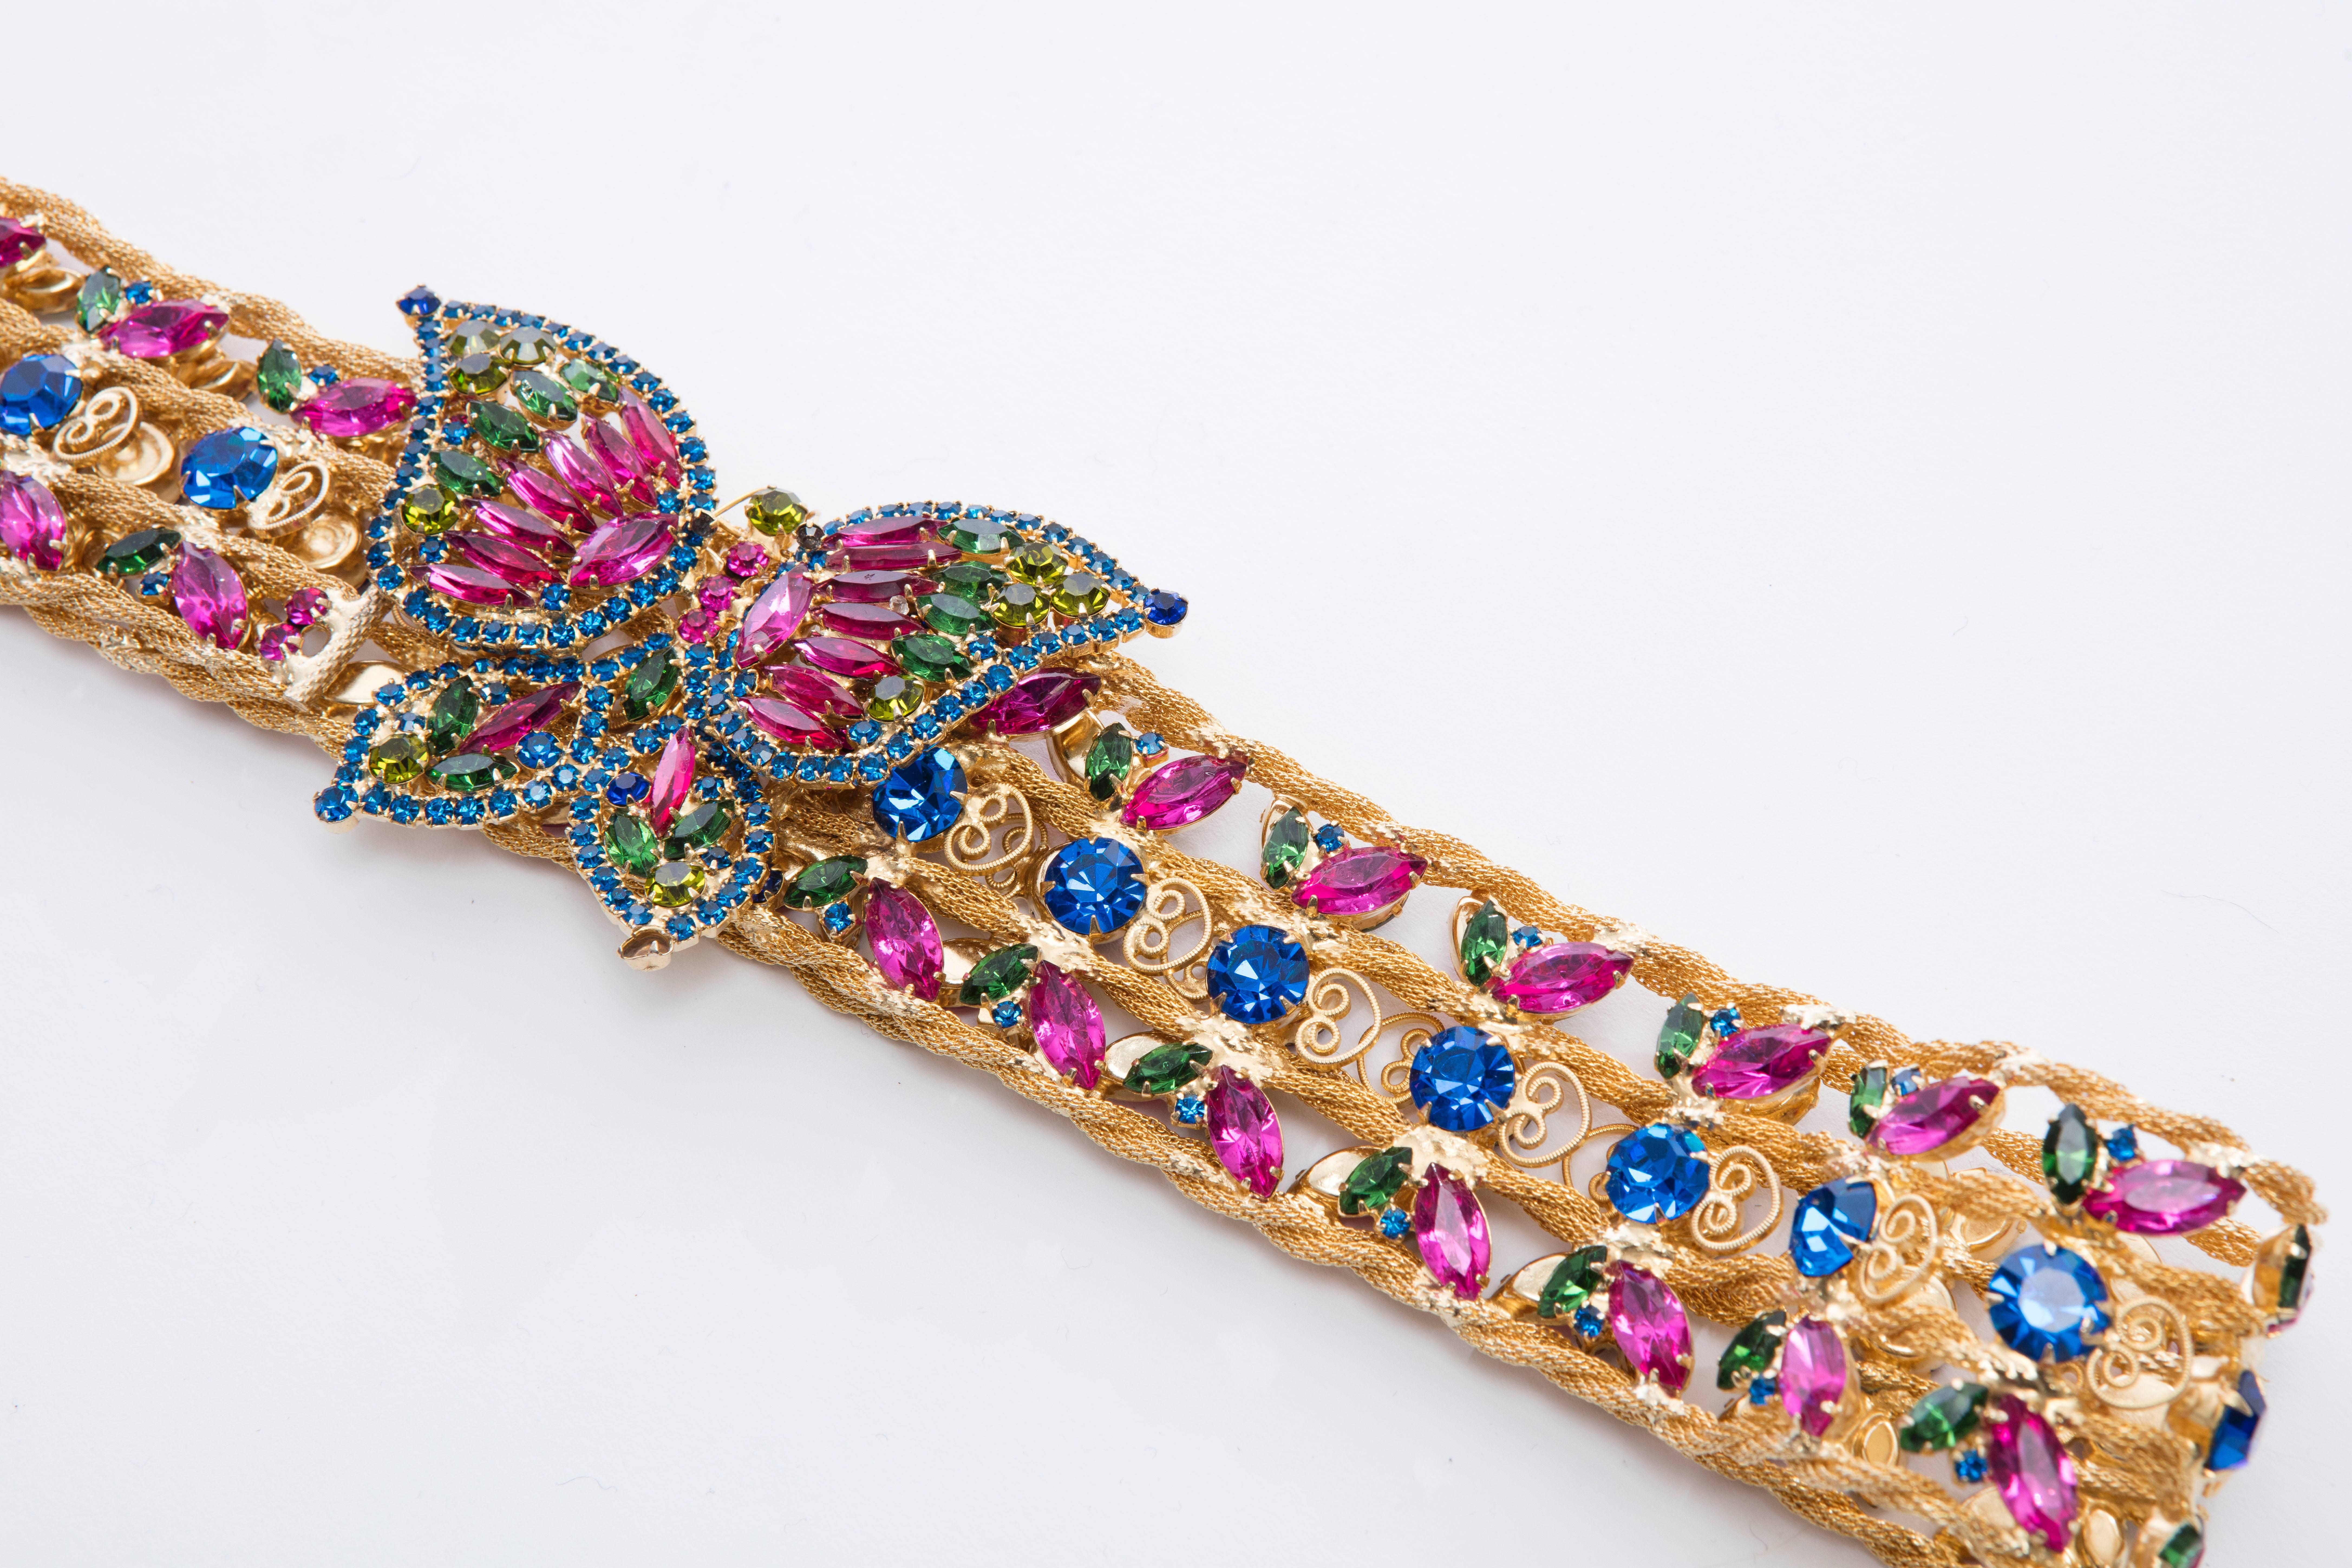 Kenneth Jay Lane, circa 1960's vintage butterfly buckle with gold-tone woven jeweled belt made of swarovski crystals and stamped K.J.L.

3.0